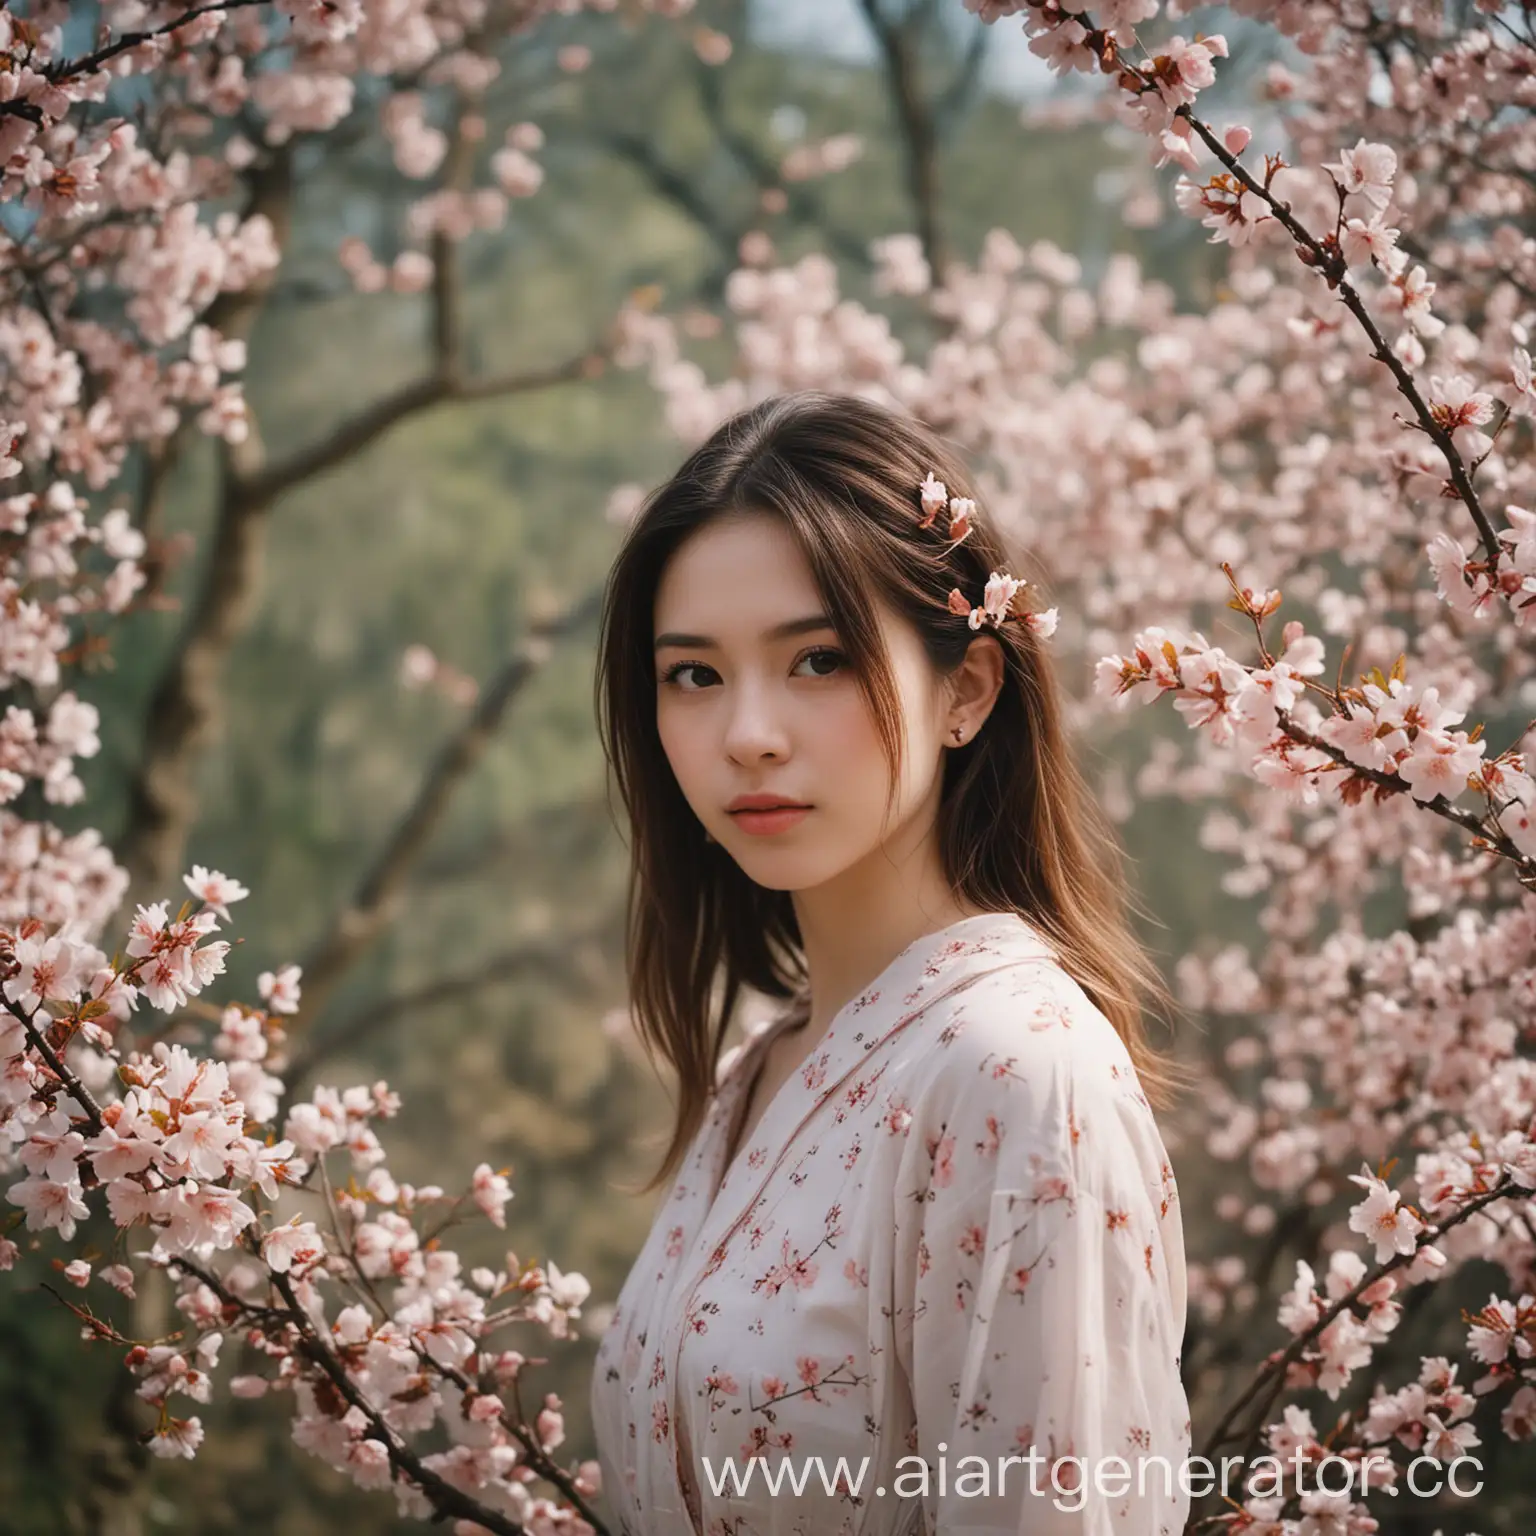 Beautiful-Girl-Posing-with-Cherry-Blossom-Tree-in-Film-Frame-Studio-Photography